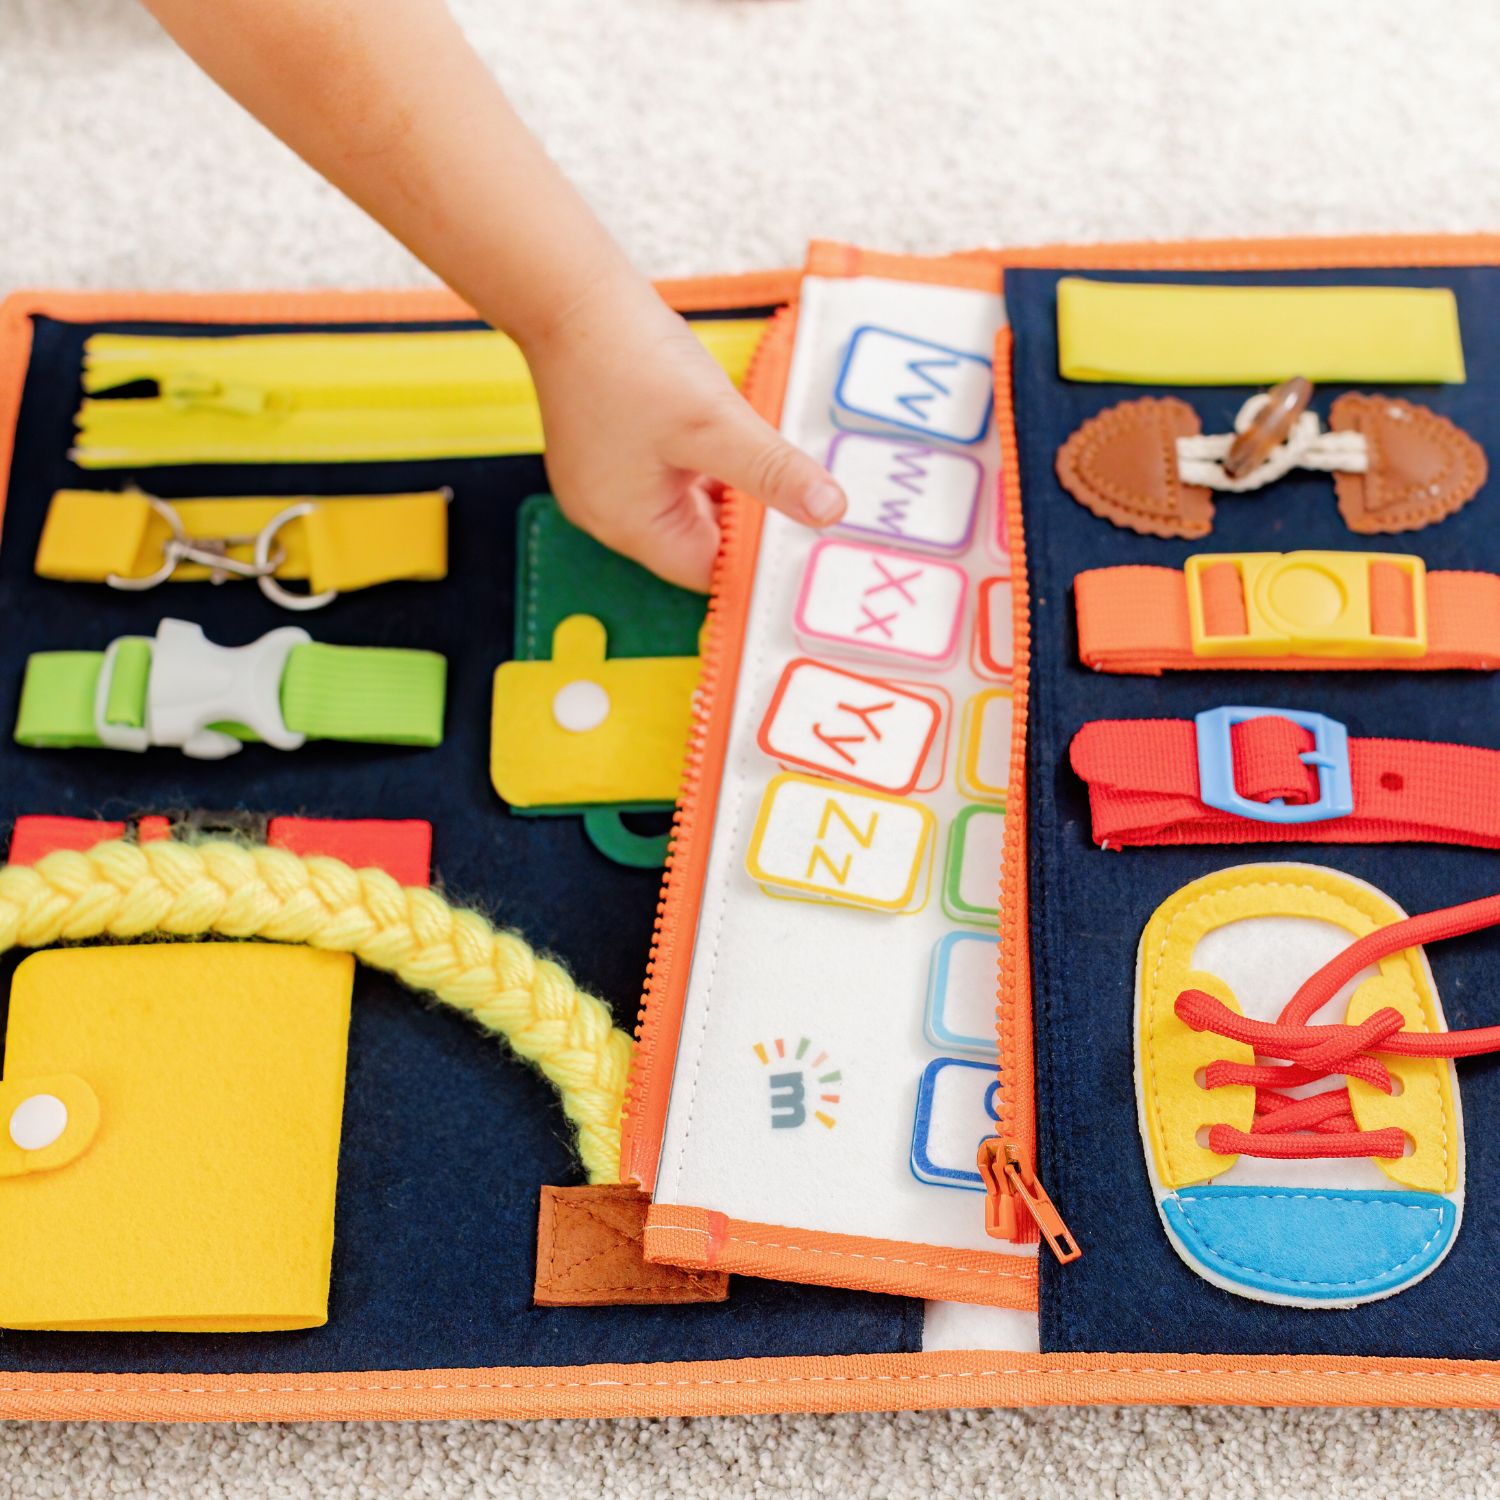 Milleli Busy board for toddlers- travel toys and educational gifts for toddler boys and girls